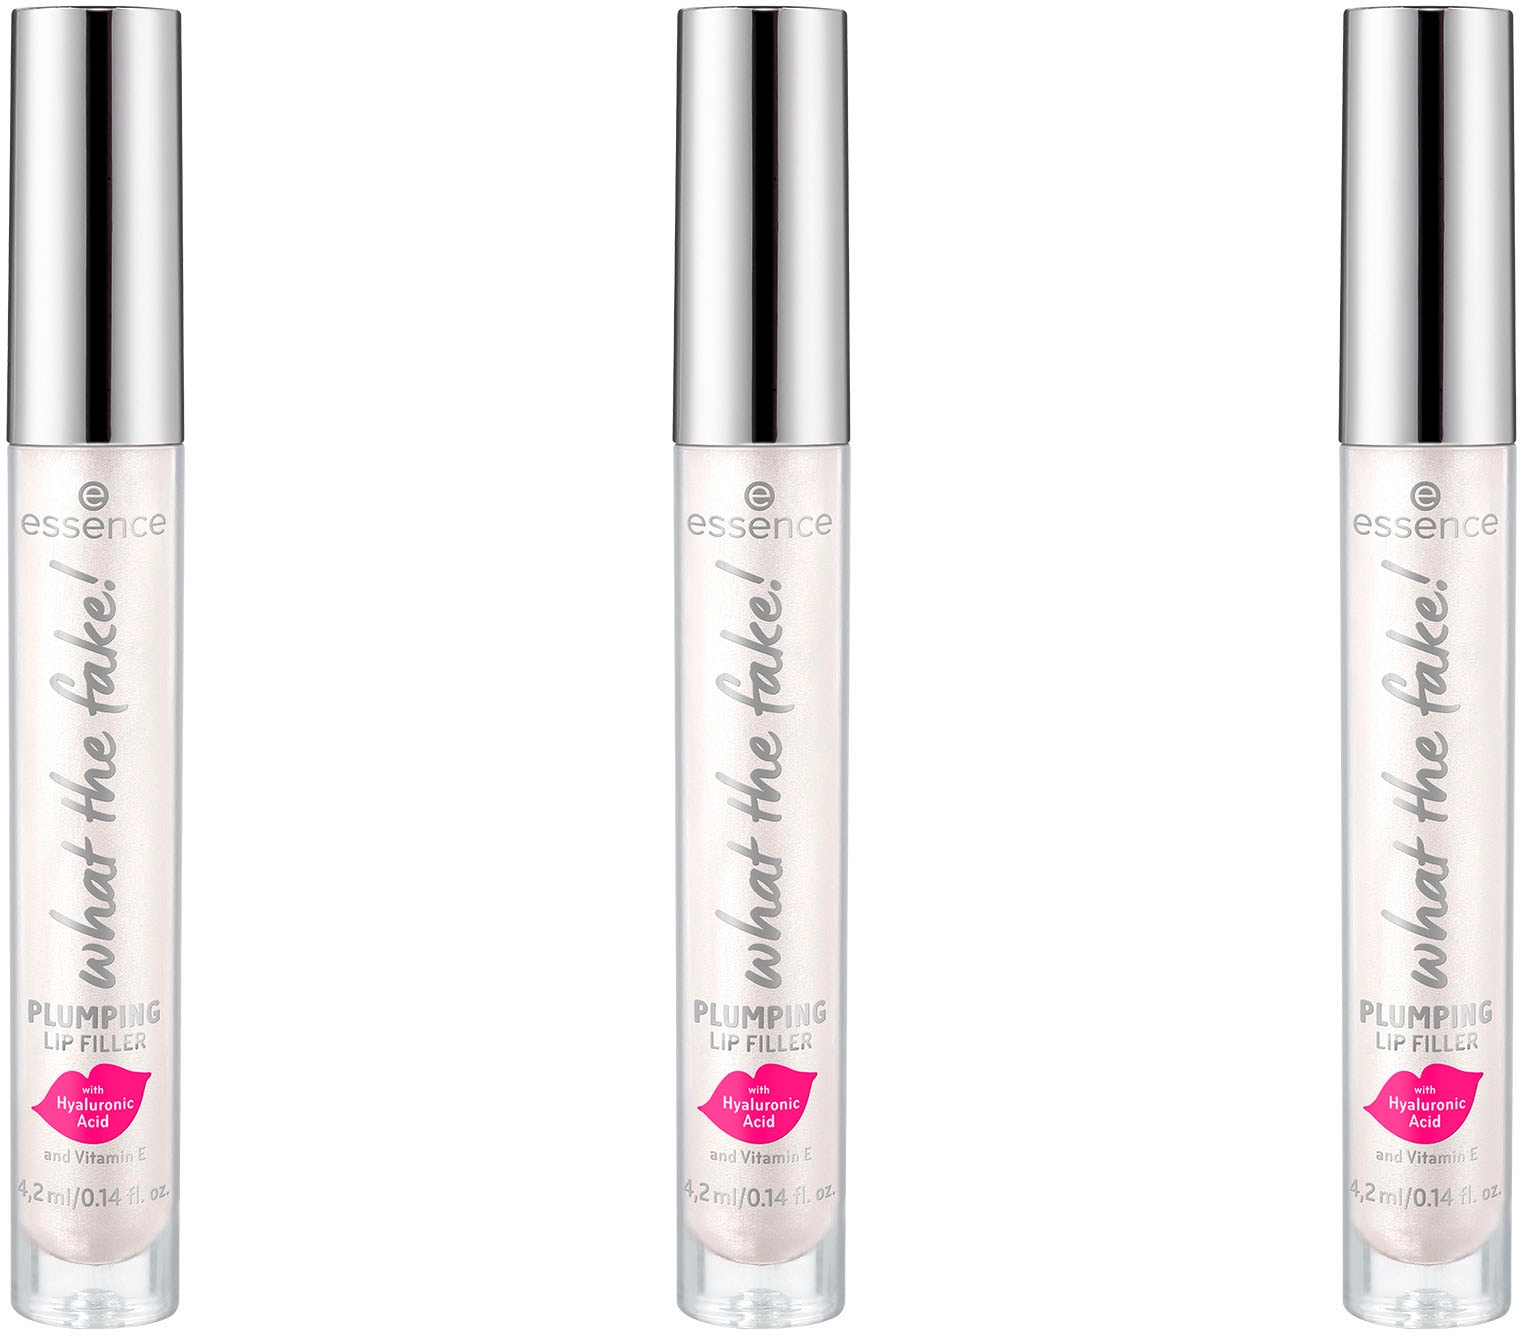 3 Essence online LIP »what (Set, fake! tlg.) kaufen the PLUMPING Lipgloss FILLER«,